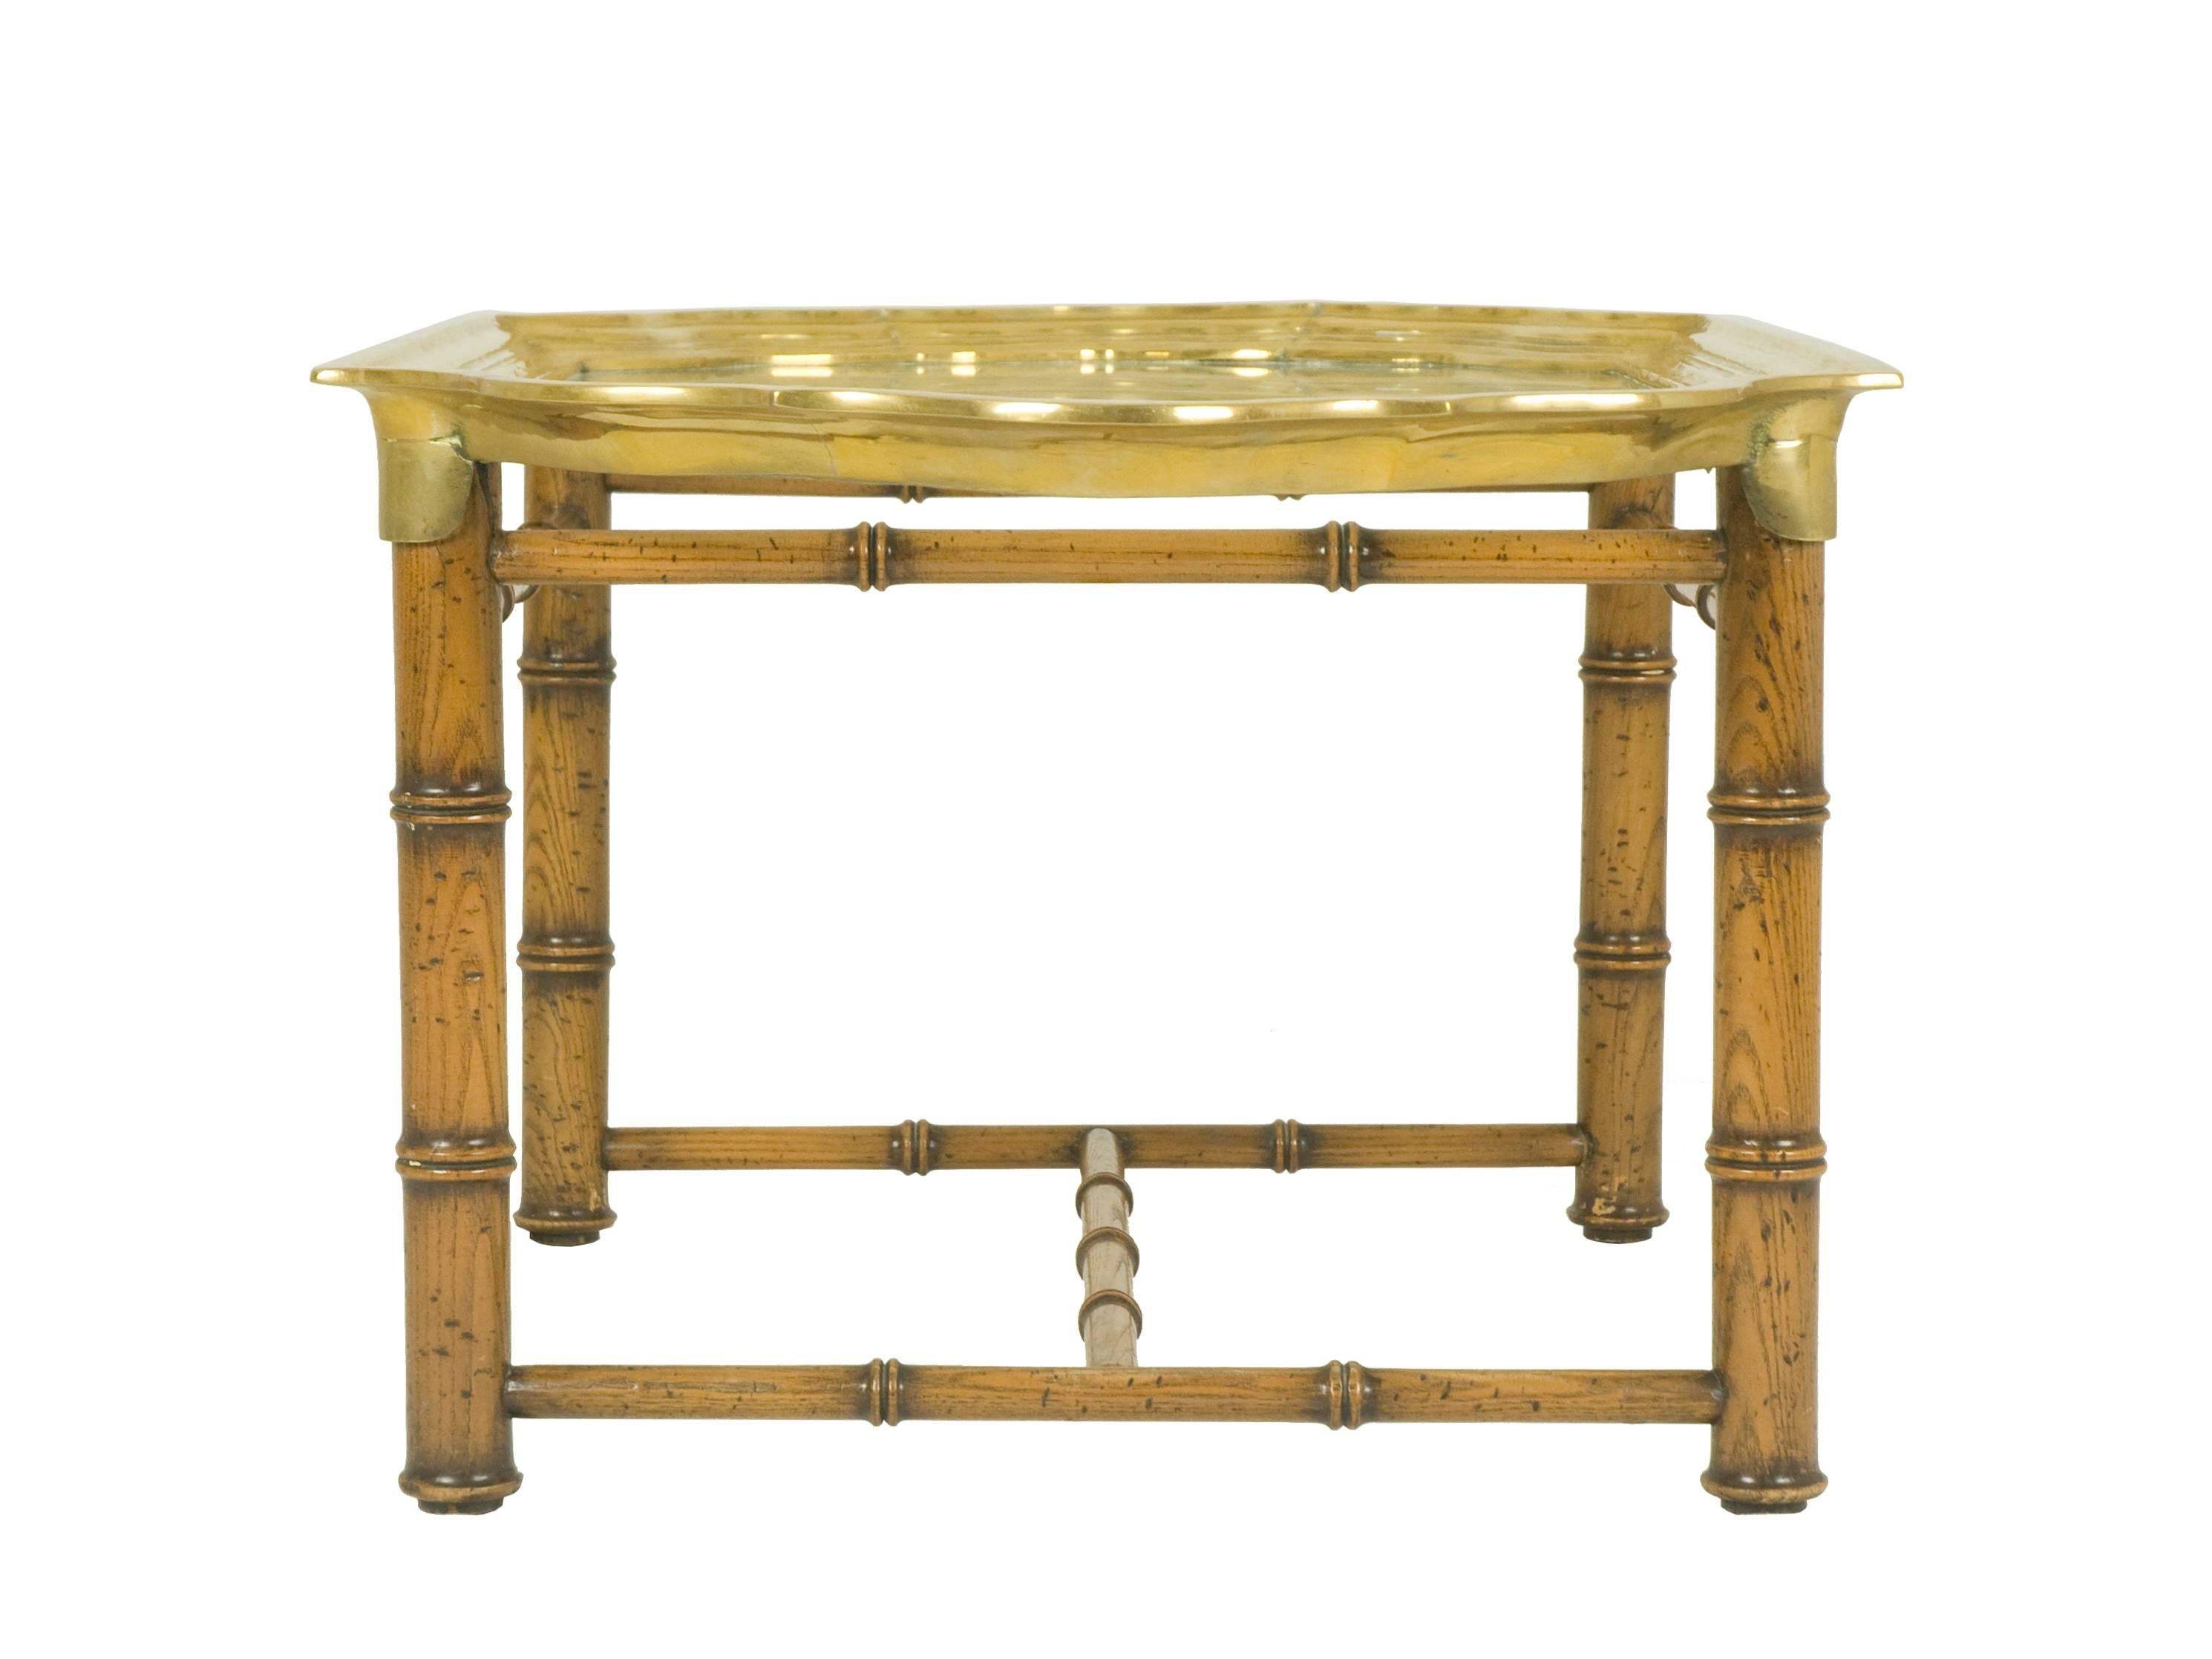 A rare and valuable coffee table in the style of Romeo Rega made from a bamboo-style wooden base with a precious hand-craft brass frame.